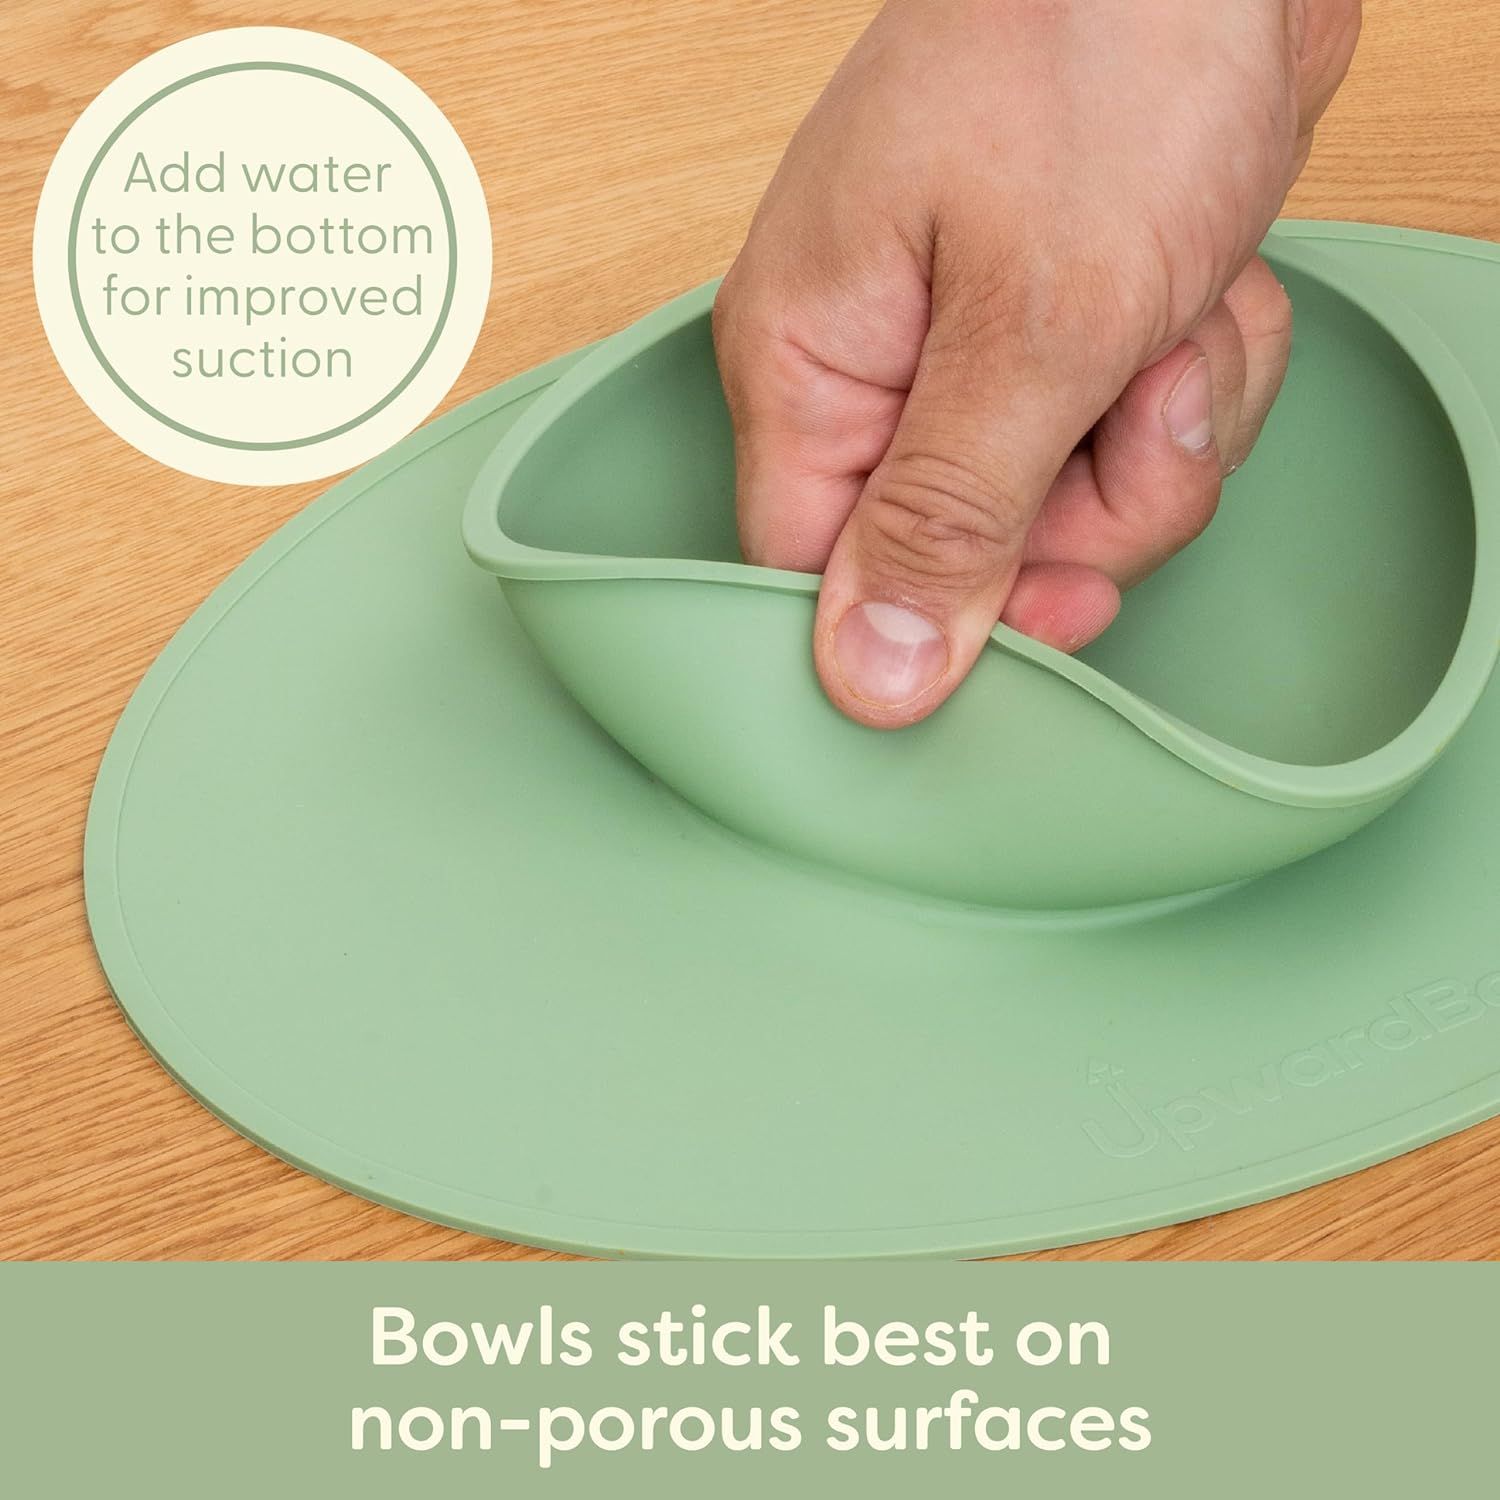 UpwardBaby Baby Led Weaning Spoons - Perfect First Spoon Set